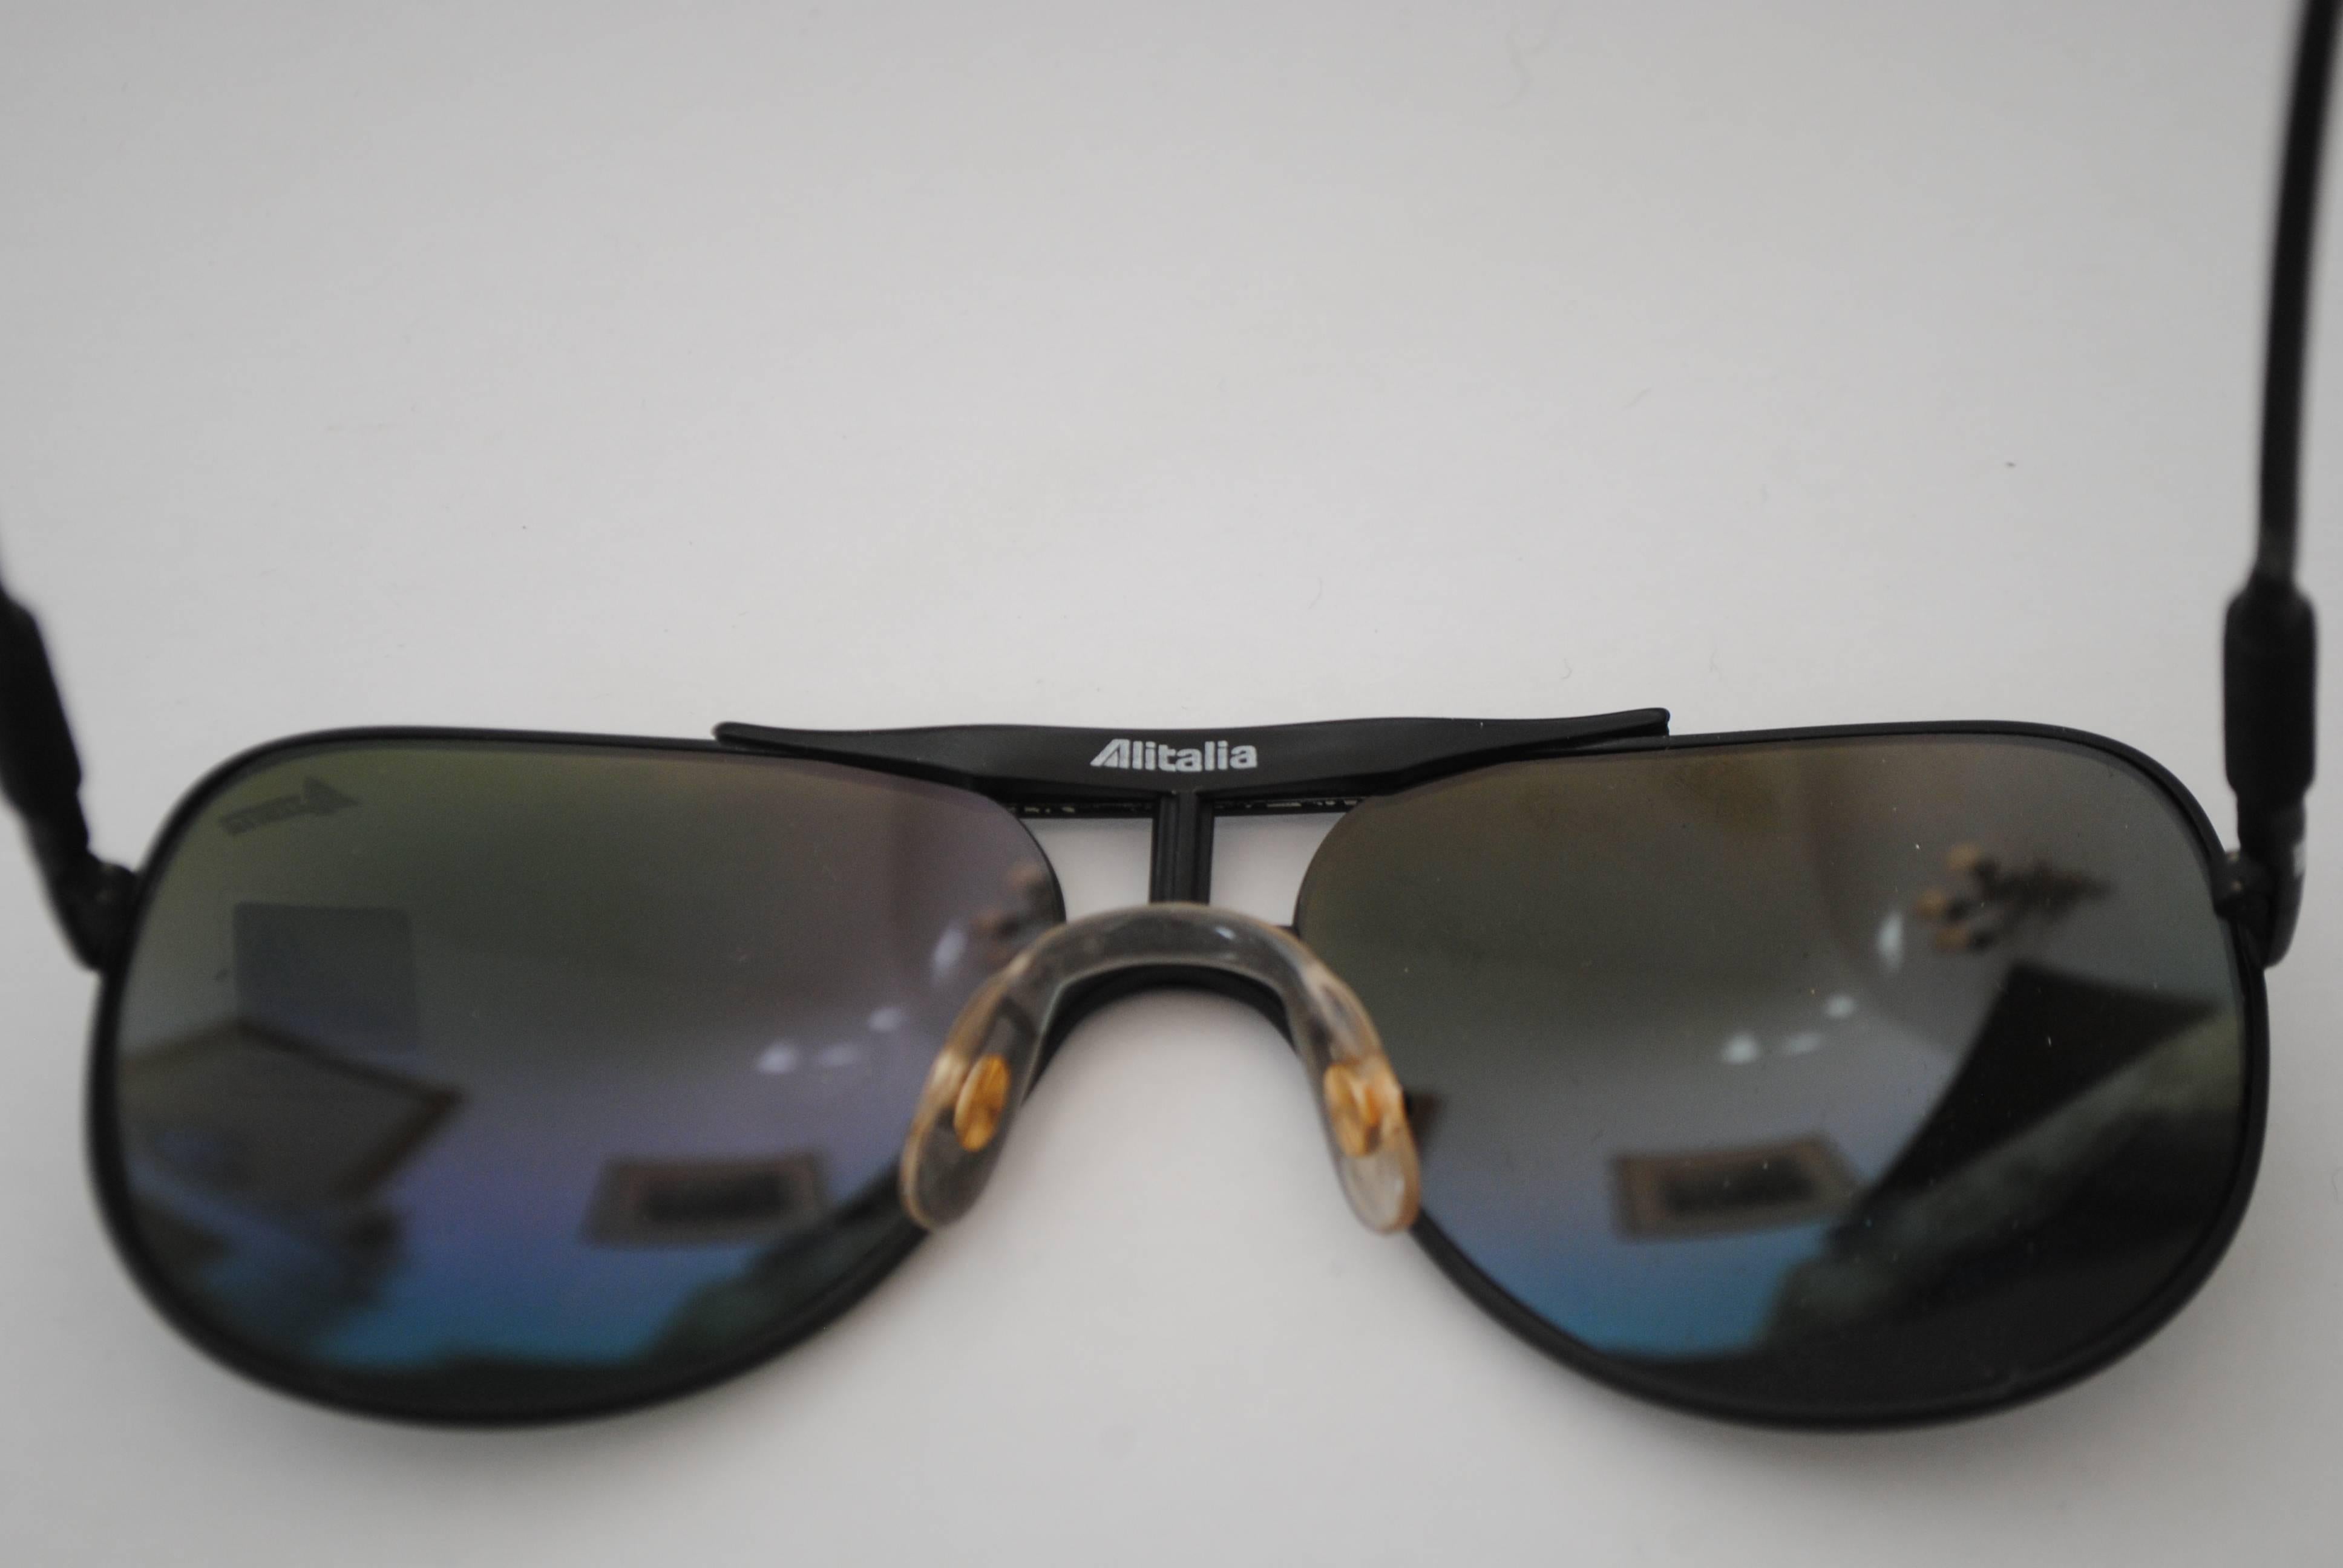 Alitalia Black anthracyte Sunglasses
totally made in italy
Sunglasses measurements: 15 x 13 cm
Glasses measurements: 5.5 x 6.5 cm